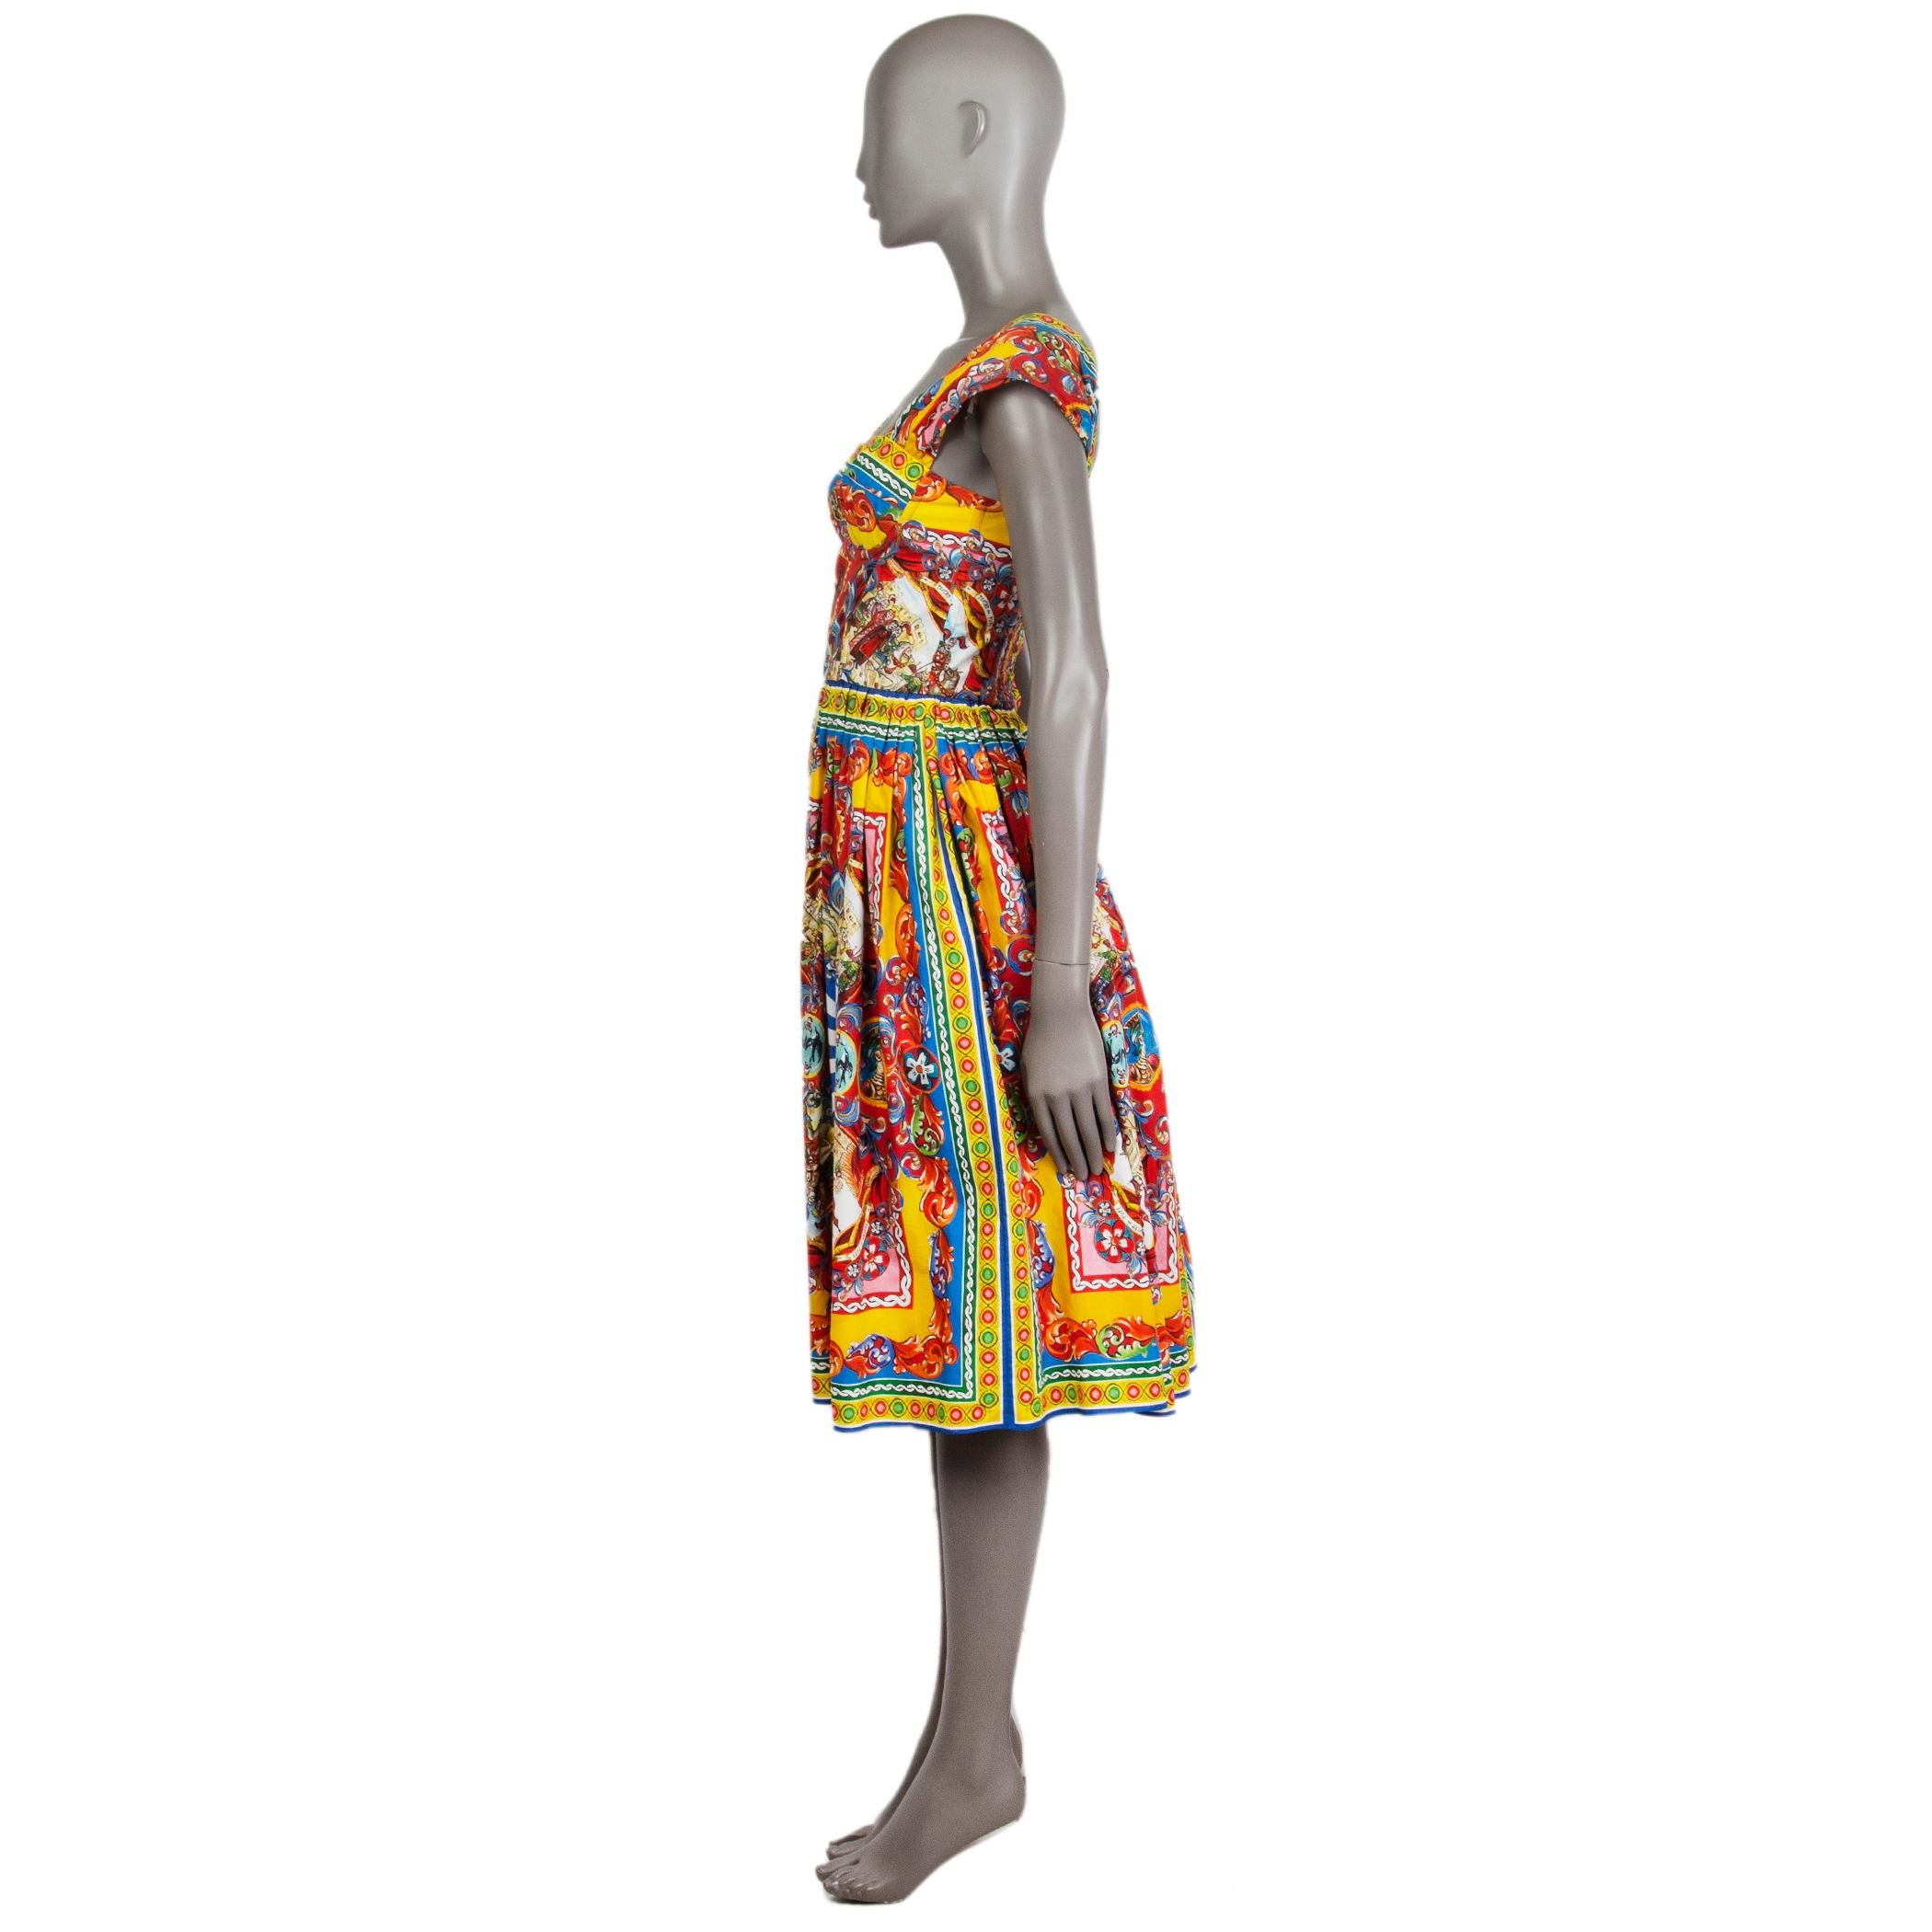 Dolce & Gabbana 'Teatro dei Pupi' dress in red, yellow, blue, green, rose, orange, and white cotton (100%). With cap sleeves, inside wiring around the bust for support, and pleated skirt. Closes with concealed metal zipper on the back. Unlined. Has